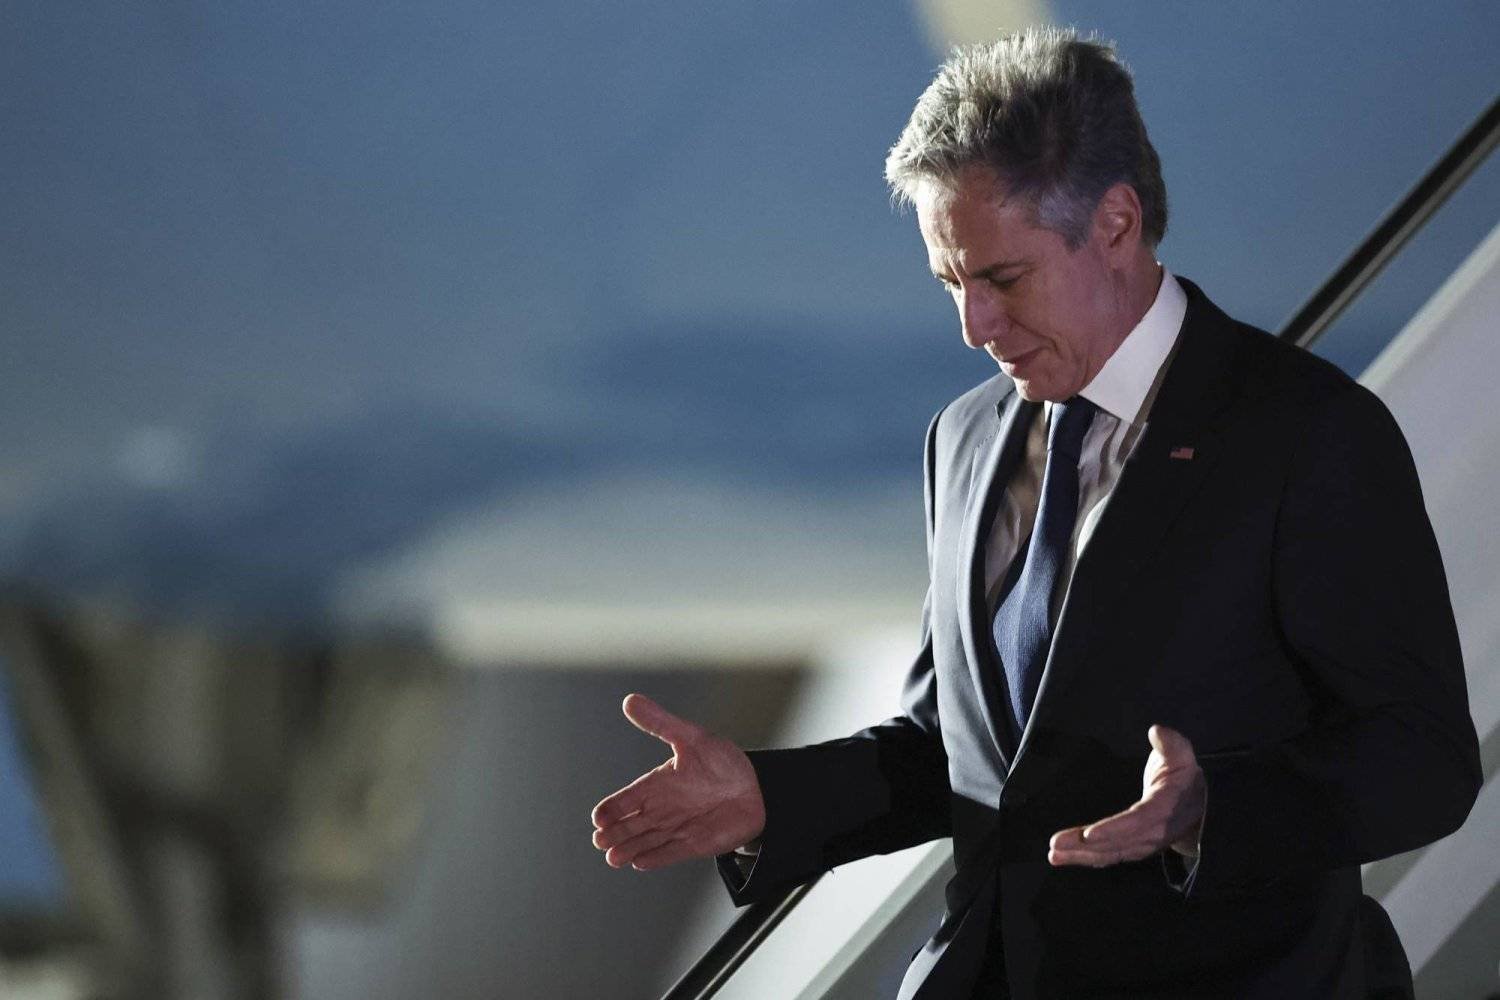 US Secretary of State Antony Blinken gets off the plane on the runway at Jorge Newbery Airfield in Buenos Aires. (AP)